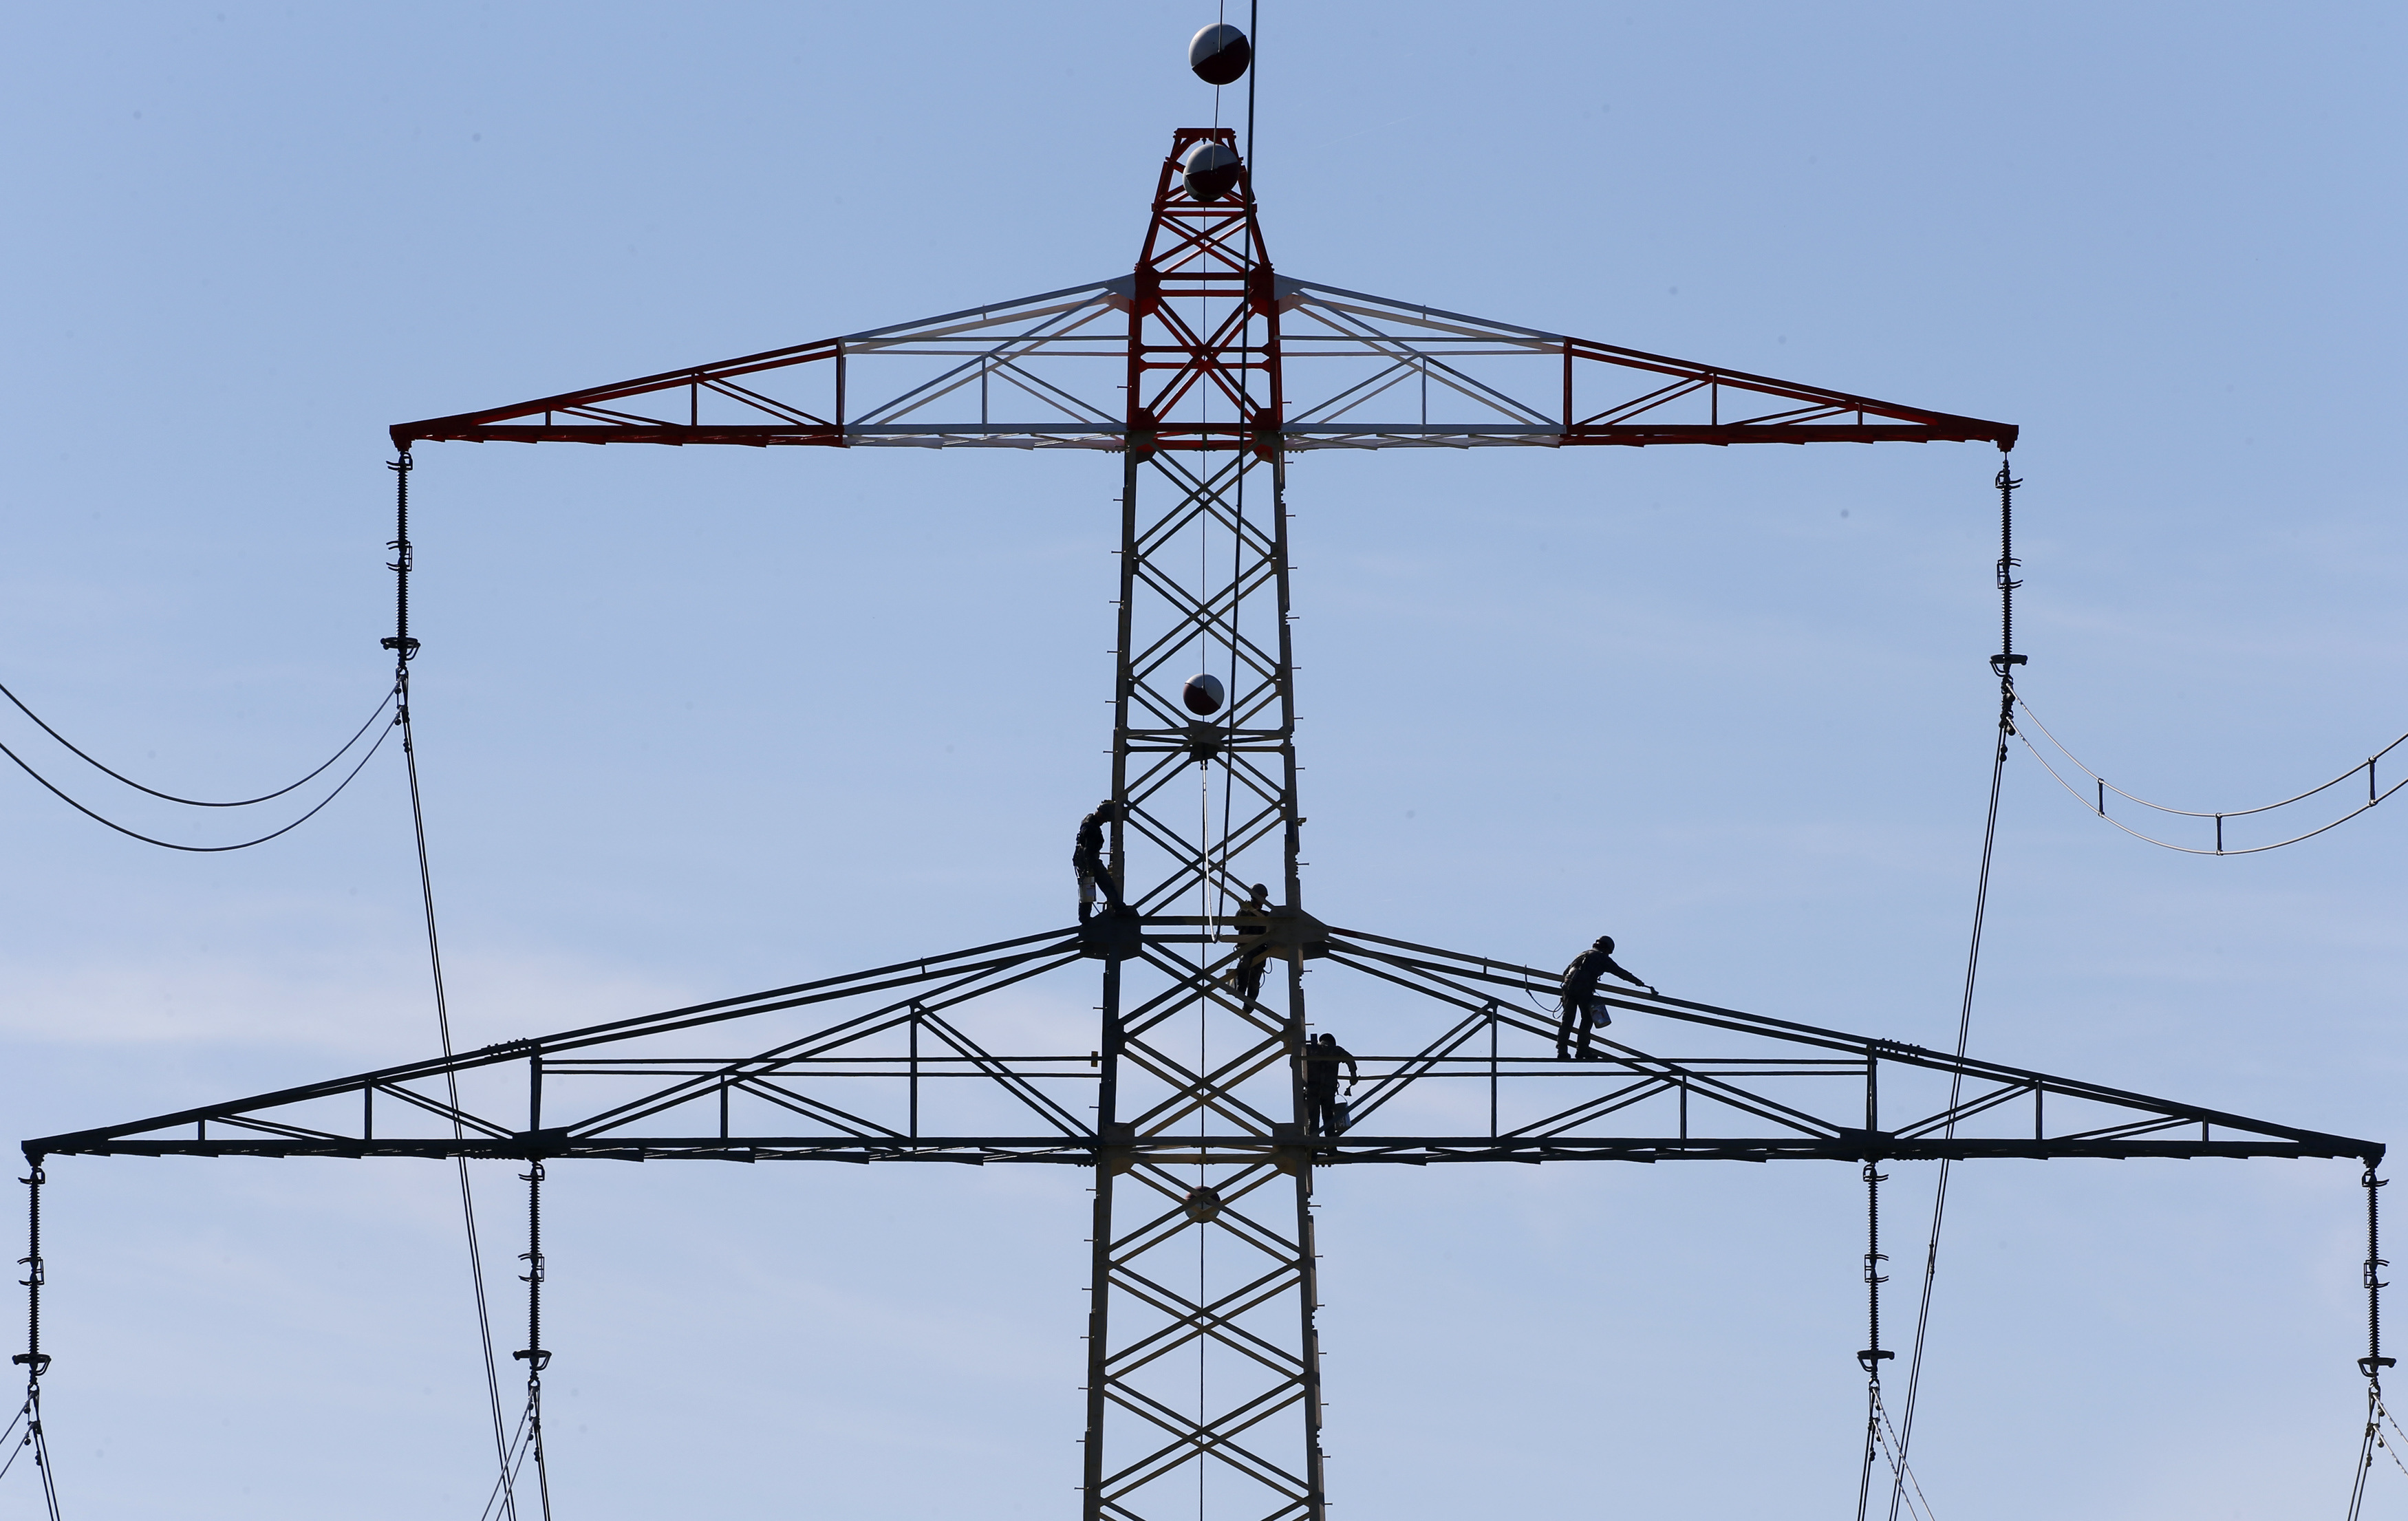 Workers renovate an electricity pylon near Gilching south of Munich